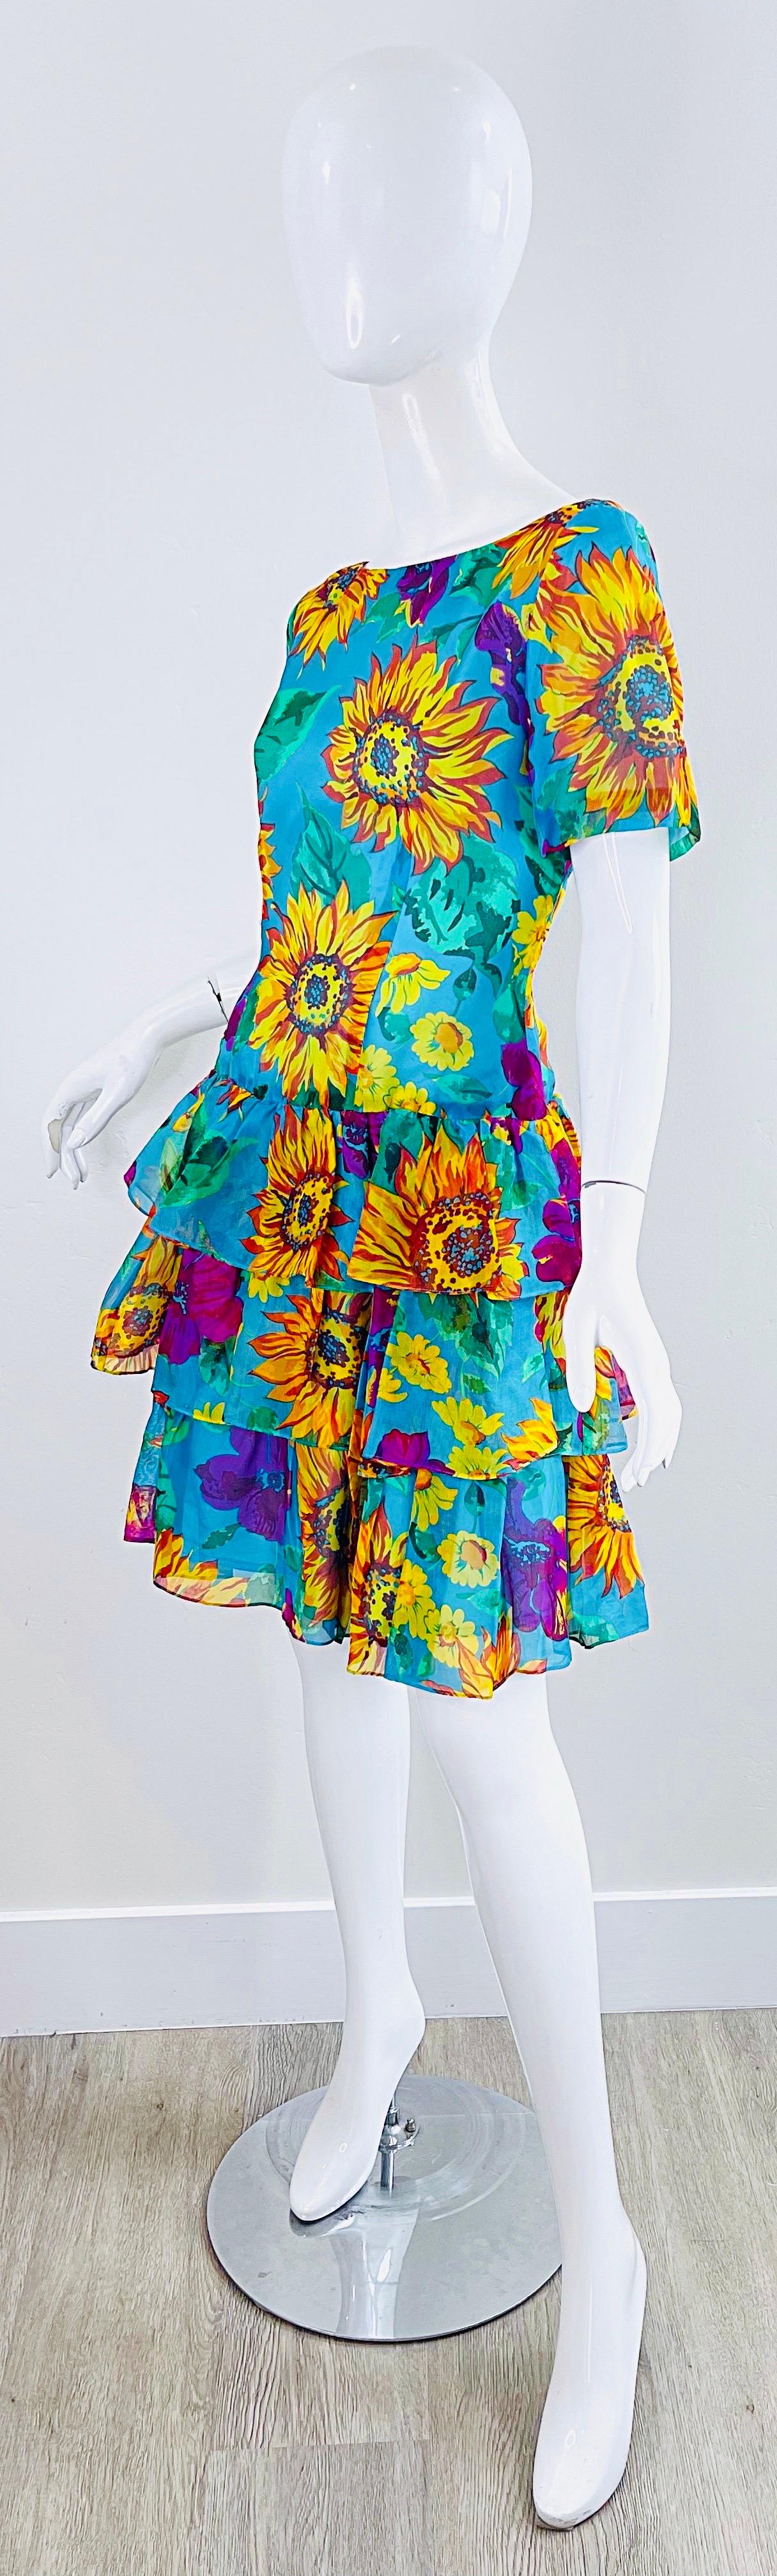 Chic 1980s Silk Chiffon Size 8 / 10 Sunflower Print Turquoise Vintage 80s Dress For Sale 8